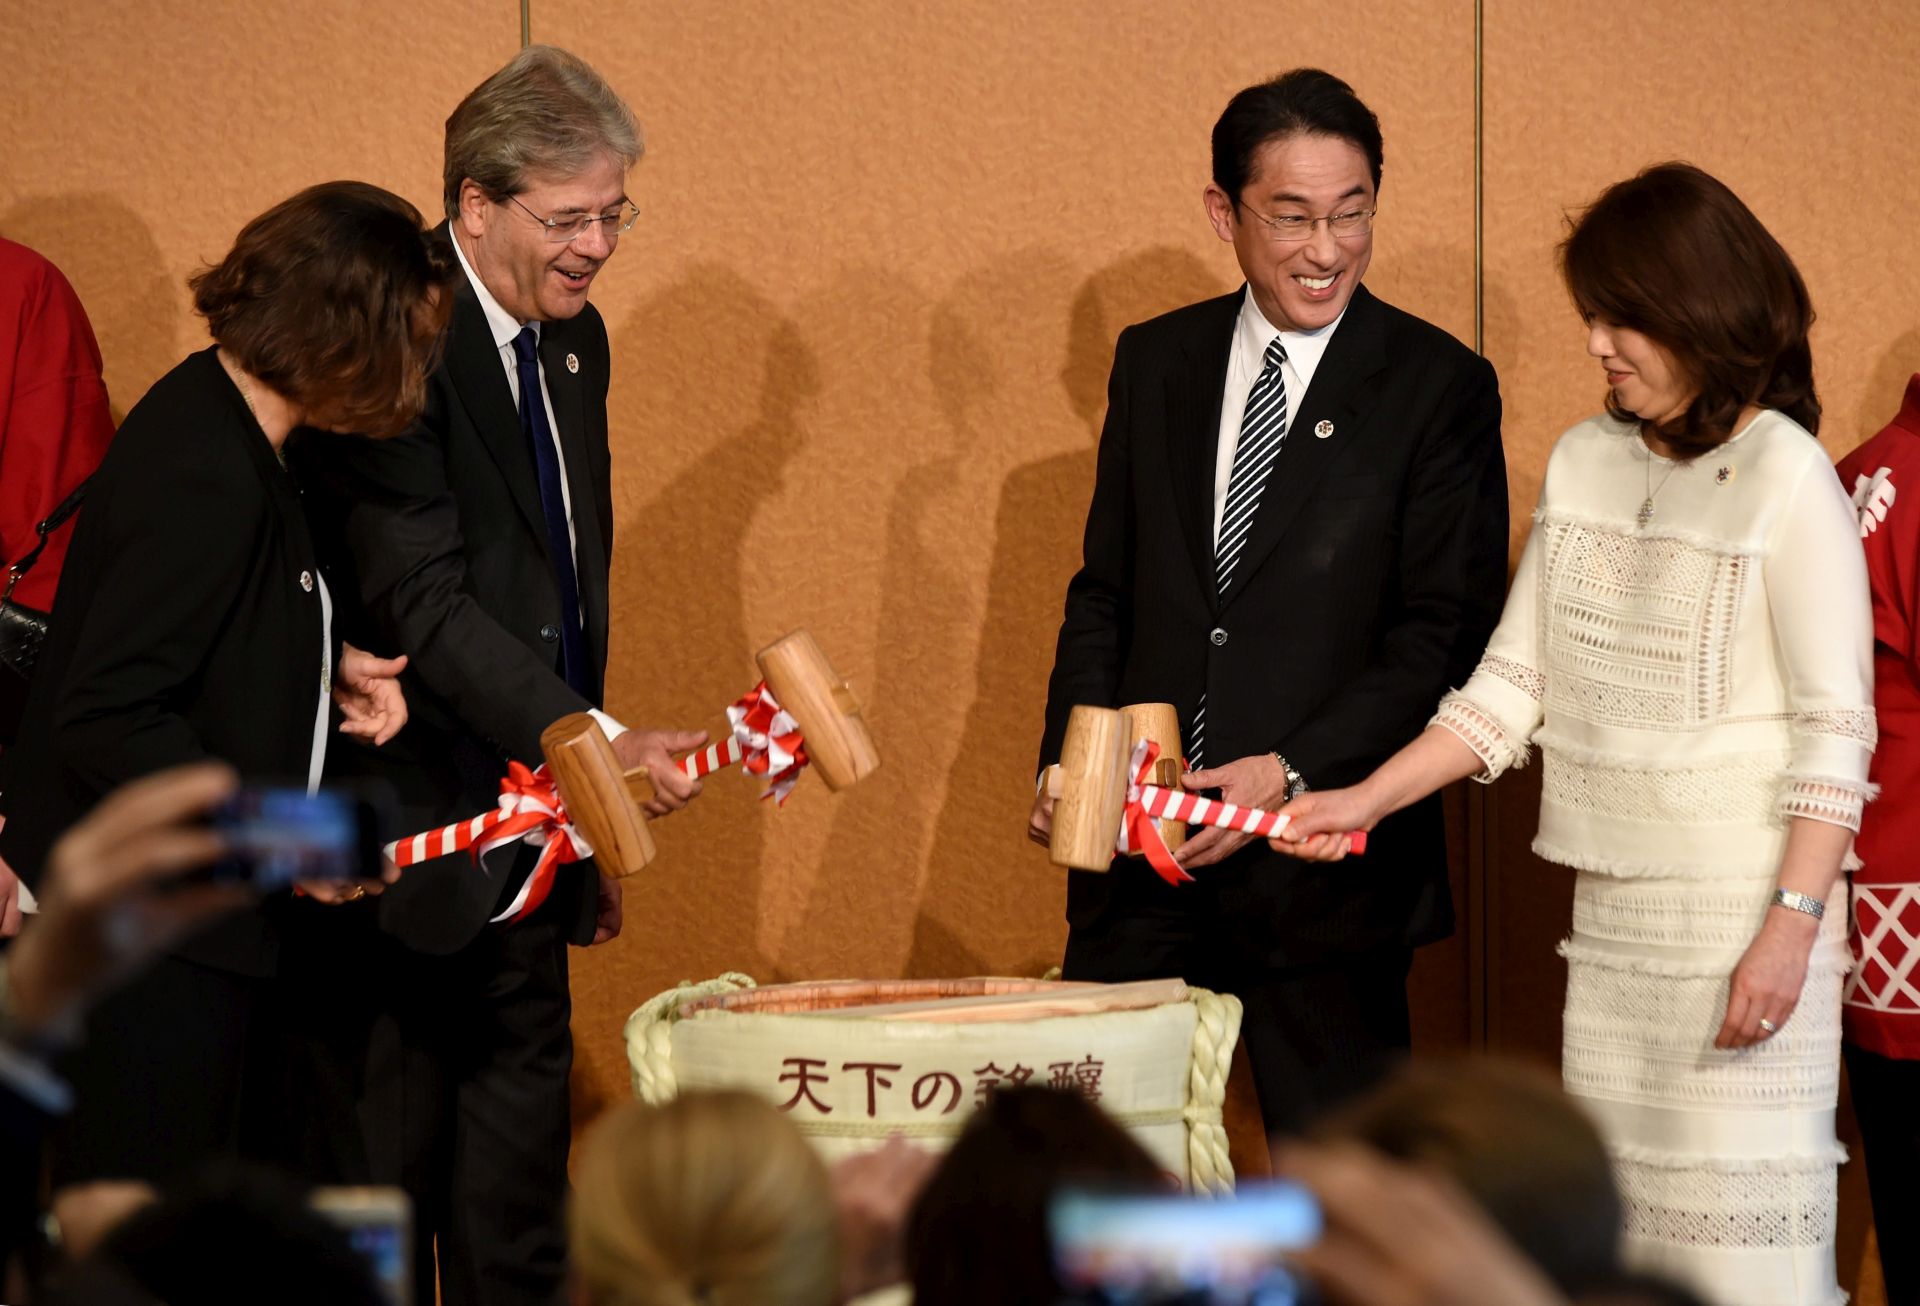 epa05252185 Japanese Foreign Minister Fumio Kishida (2-R), his wife Yuko (R), Italian Foreign Minister Paolo Gentiloni (2-L) and his wife Emanuel Mauro (L) open a Sake barrel during the welcoming reception at the at the Group of Seven (G-7) Foreign Ministers' meeting in Hiroshima, Japan, 10 April 2016. The G-7 foreign ministers from Britain, Canada, France, Germany, Italy, Japan and the United States will meet for a two-day summit to talk about various themes including nuclear disarmament and non-proliferation in the atomic bombing city of Hiroshima.  EPA/TOSHIFUMI KITAMURA / POOL